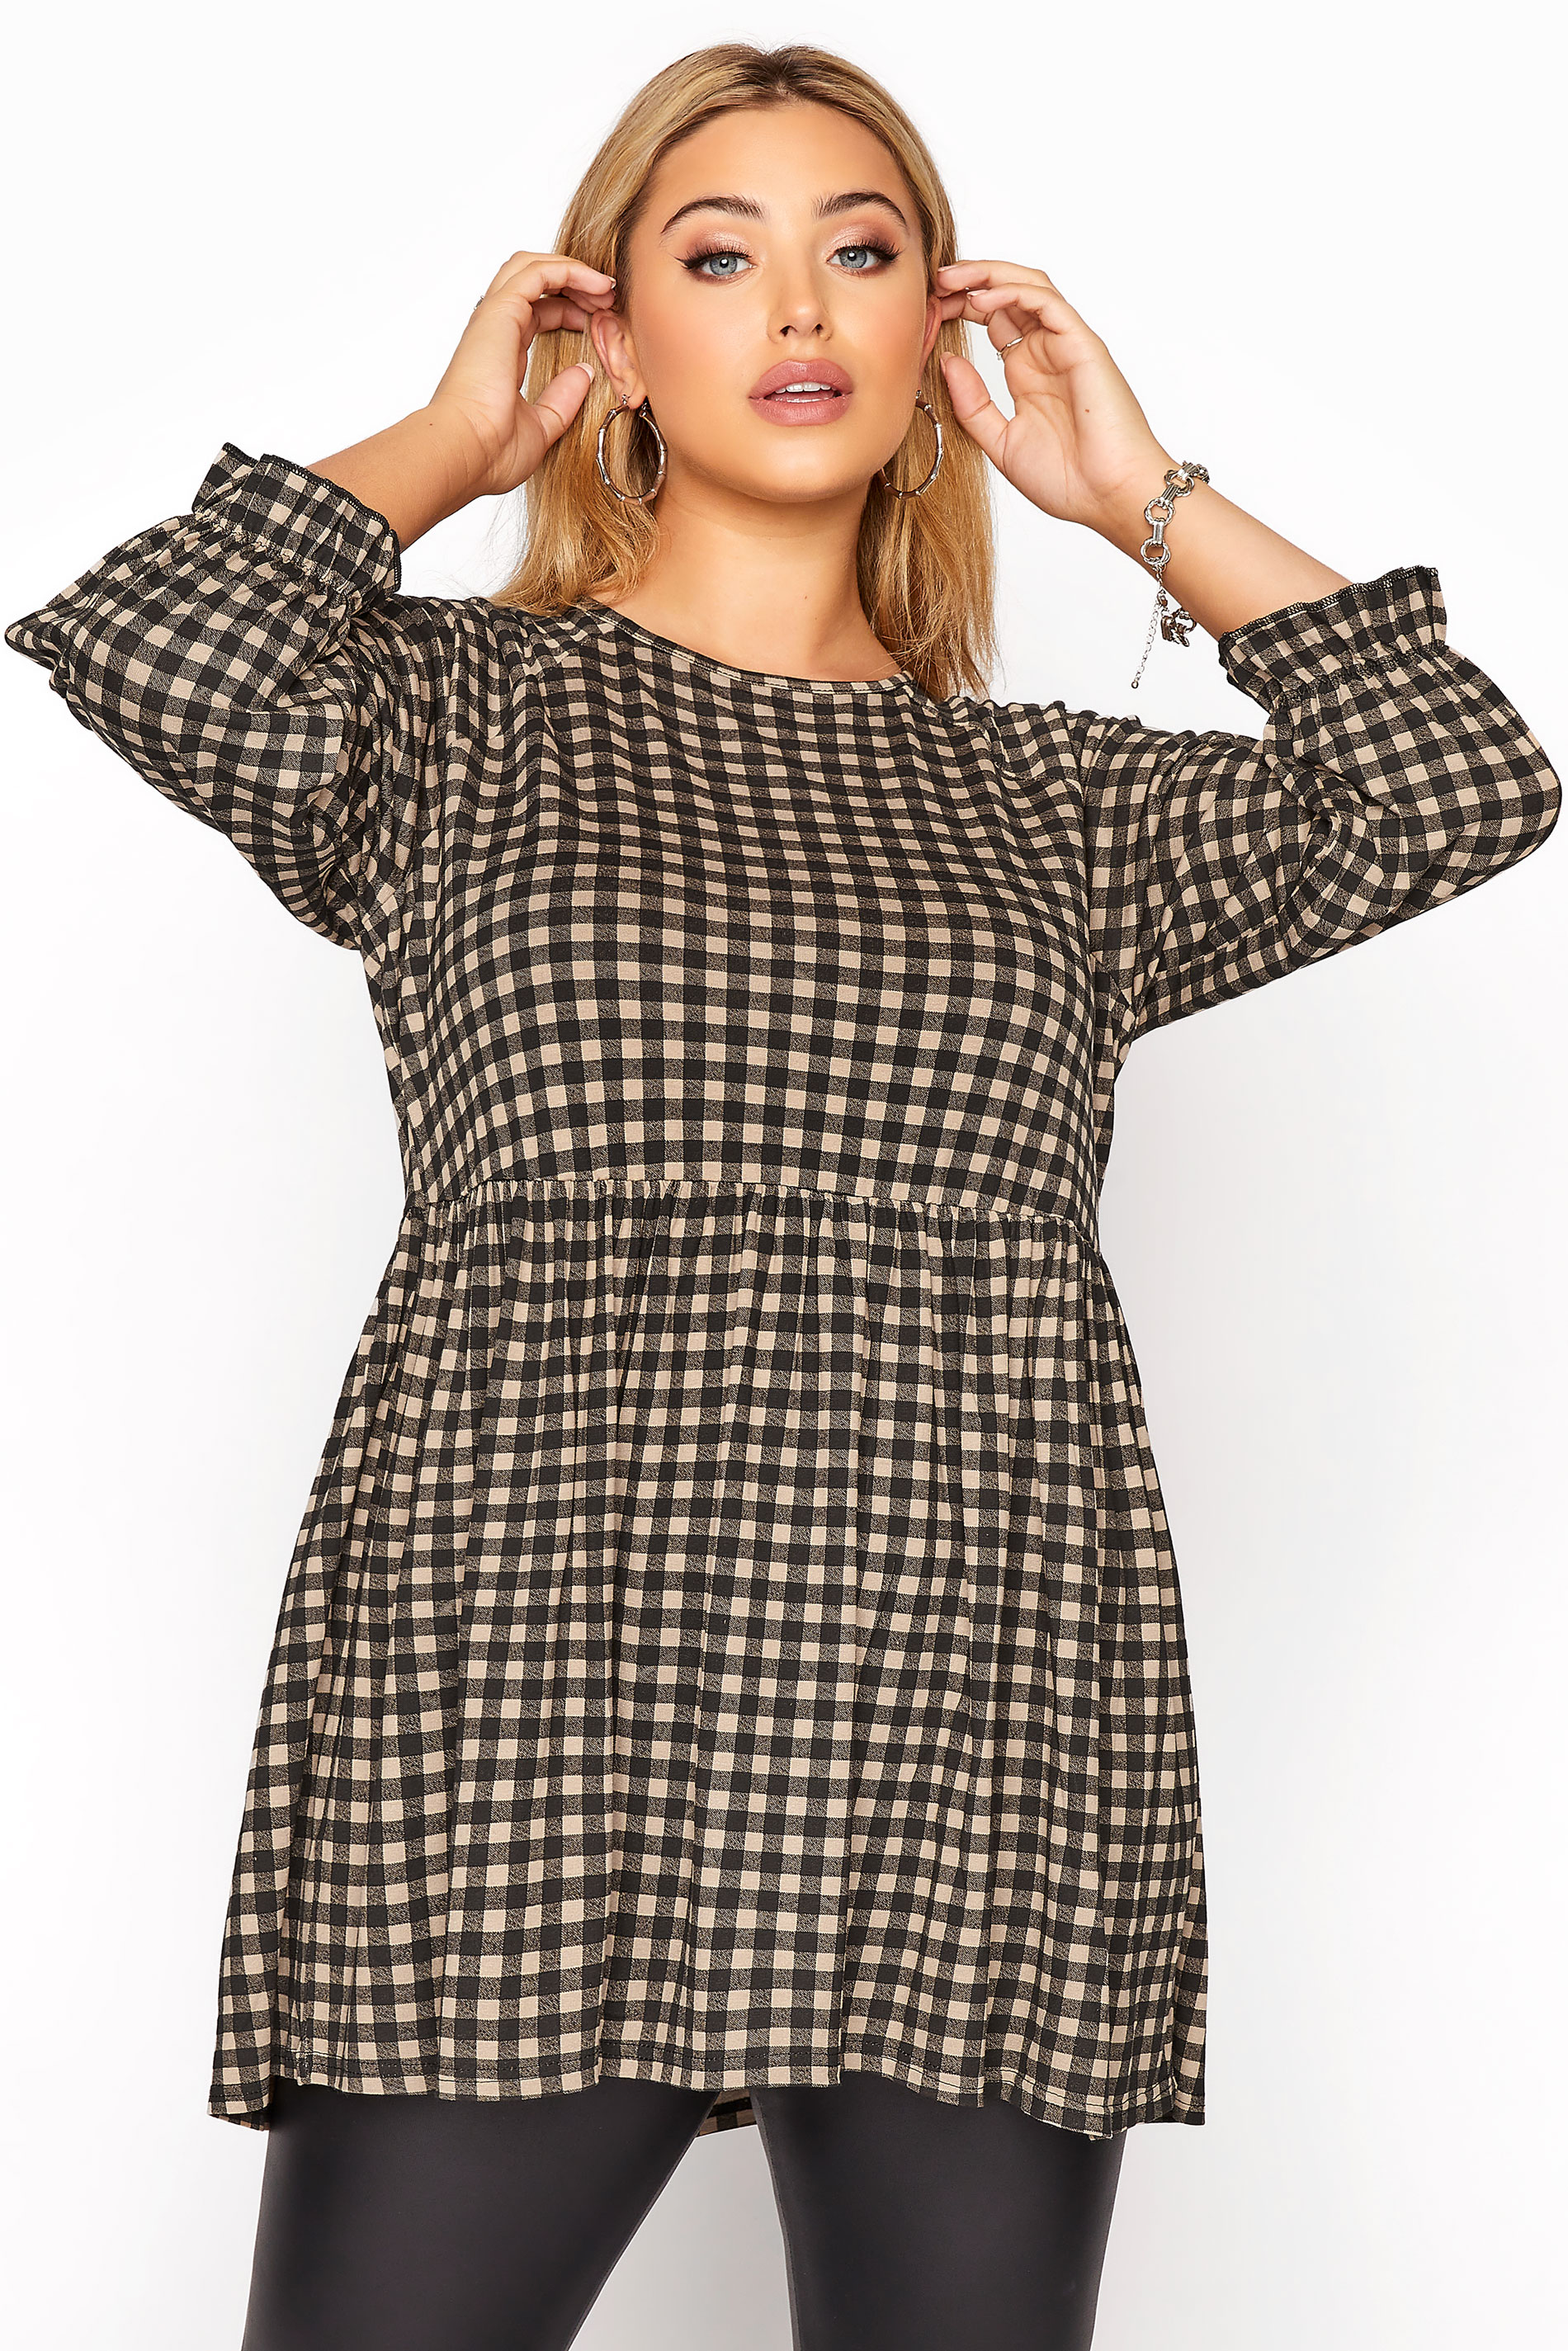 LIMITED COLLECTION Natural Gingham Smock Top_A.jpg